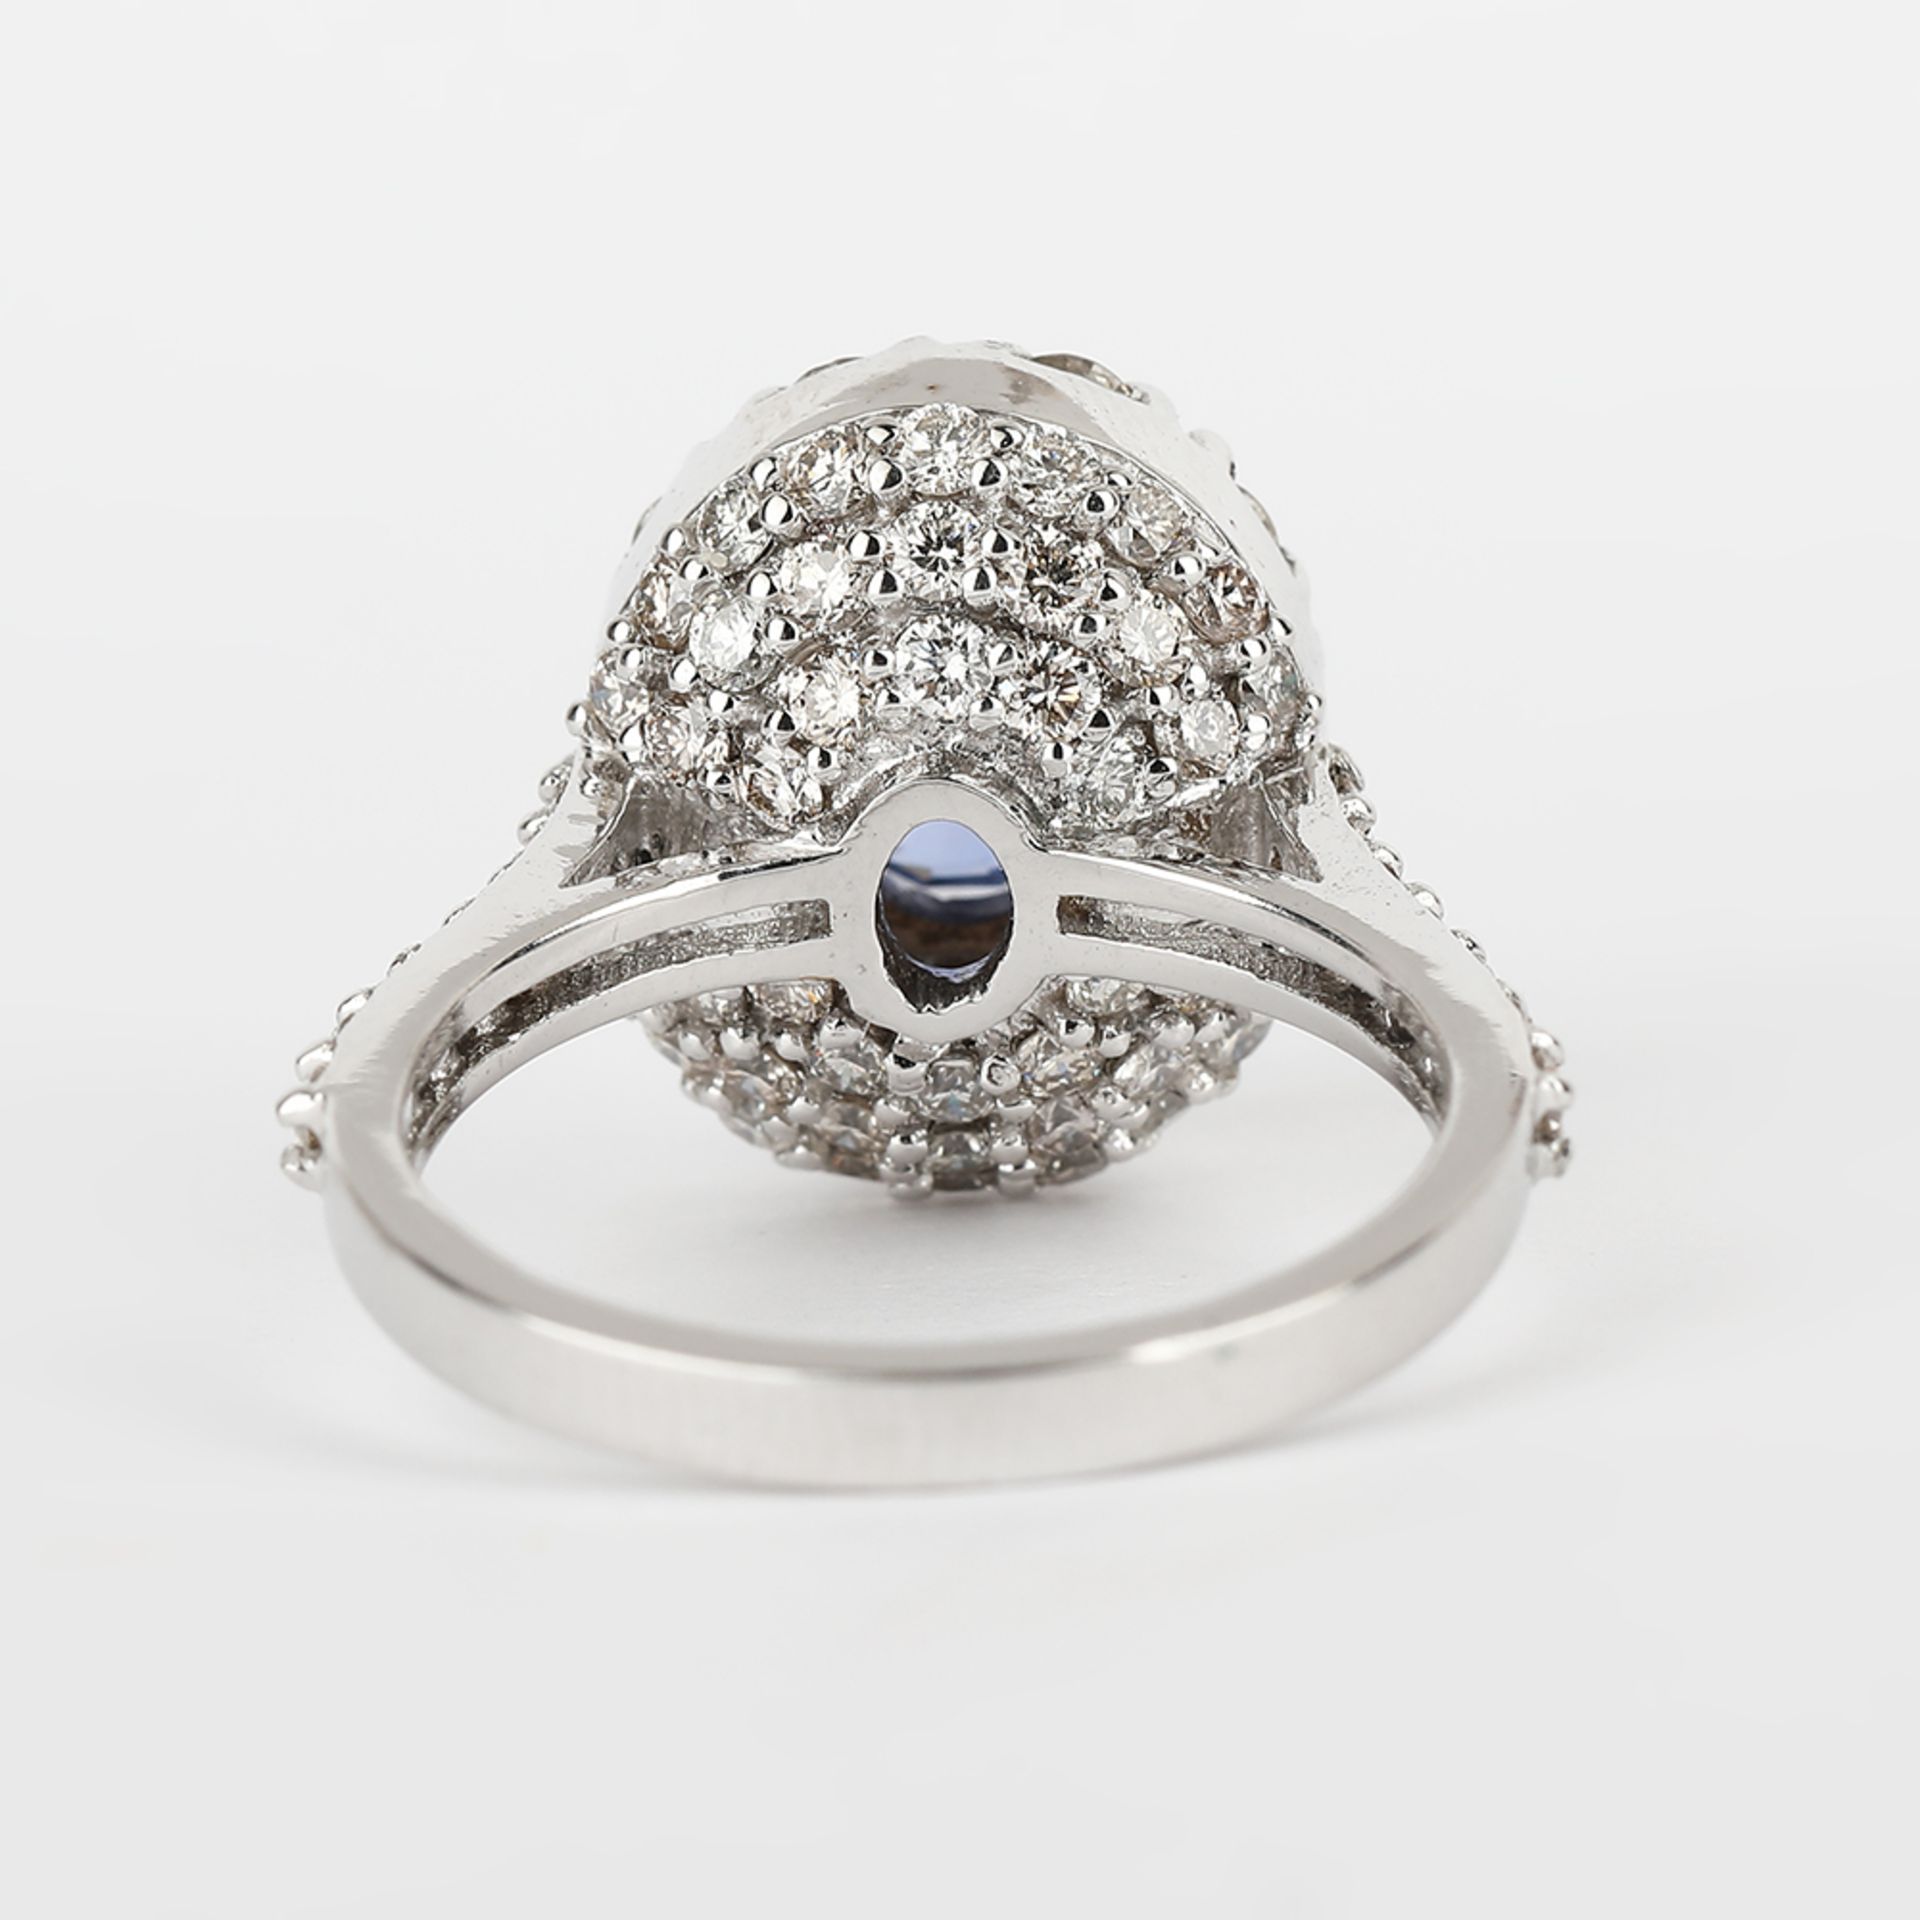 14 K / 585 White Gold Blue Sapphire ( IGI certified ) and Diamond Ring - Image 4 of 6